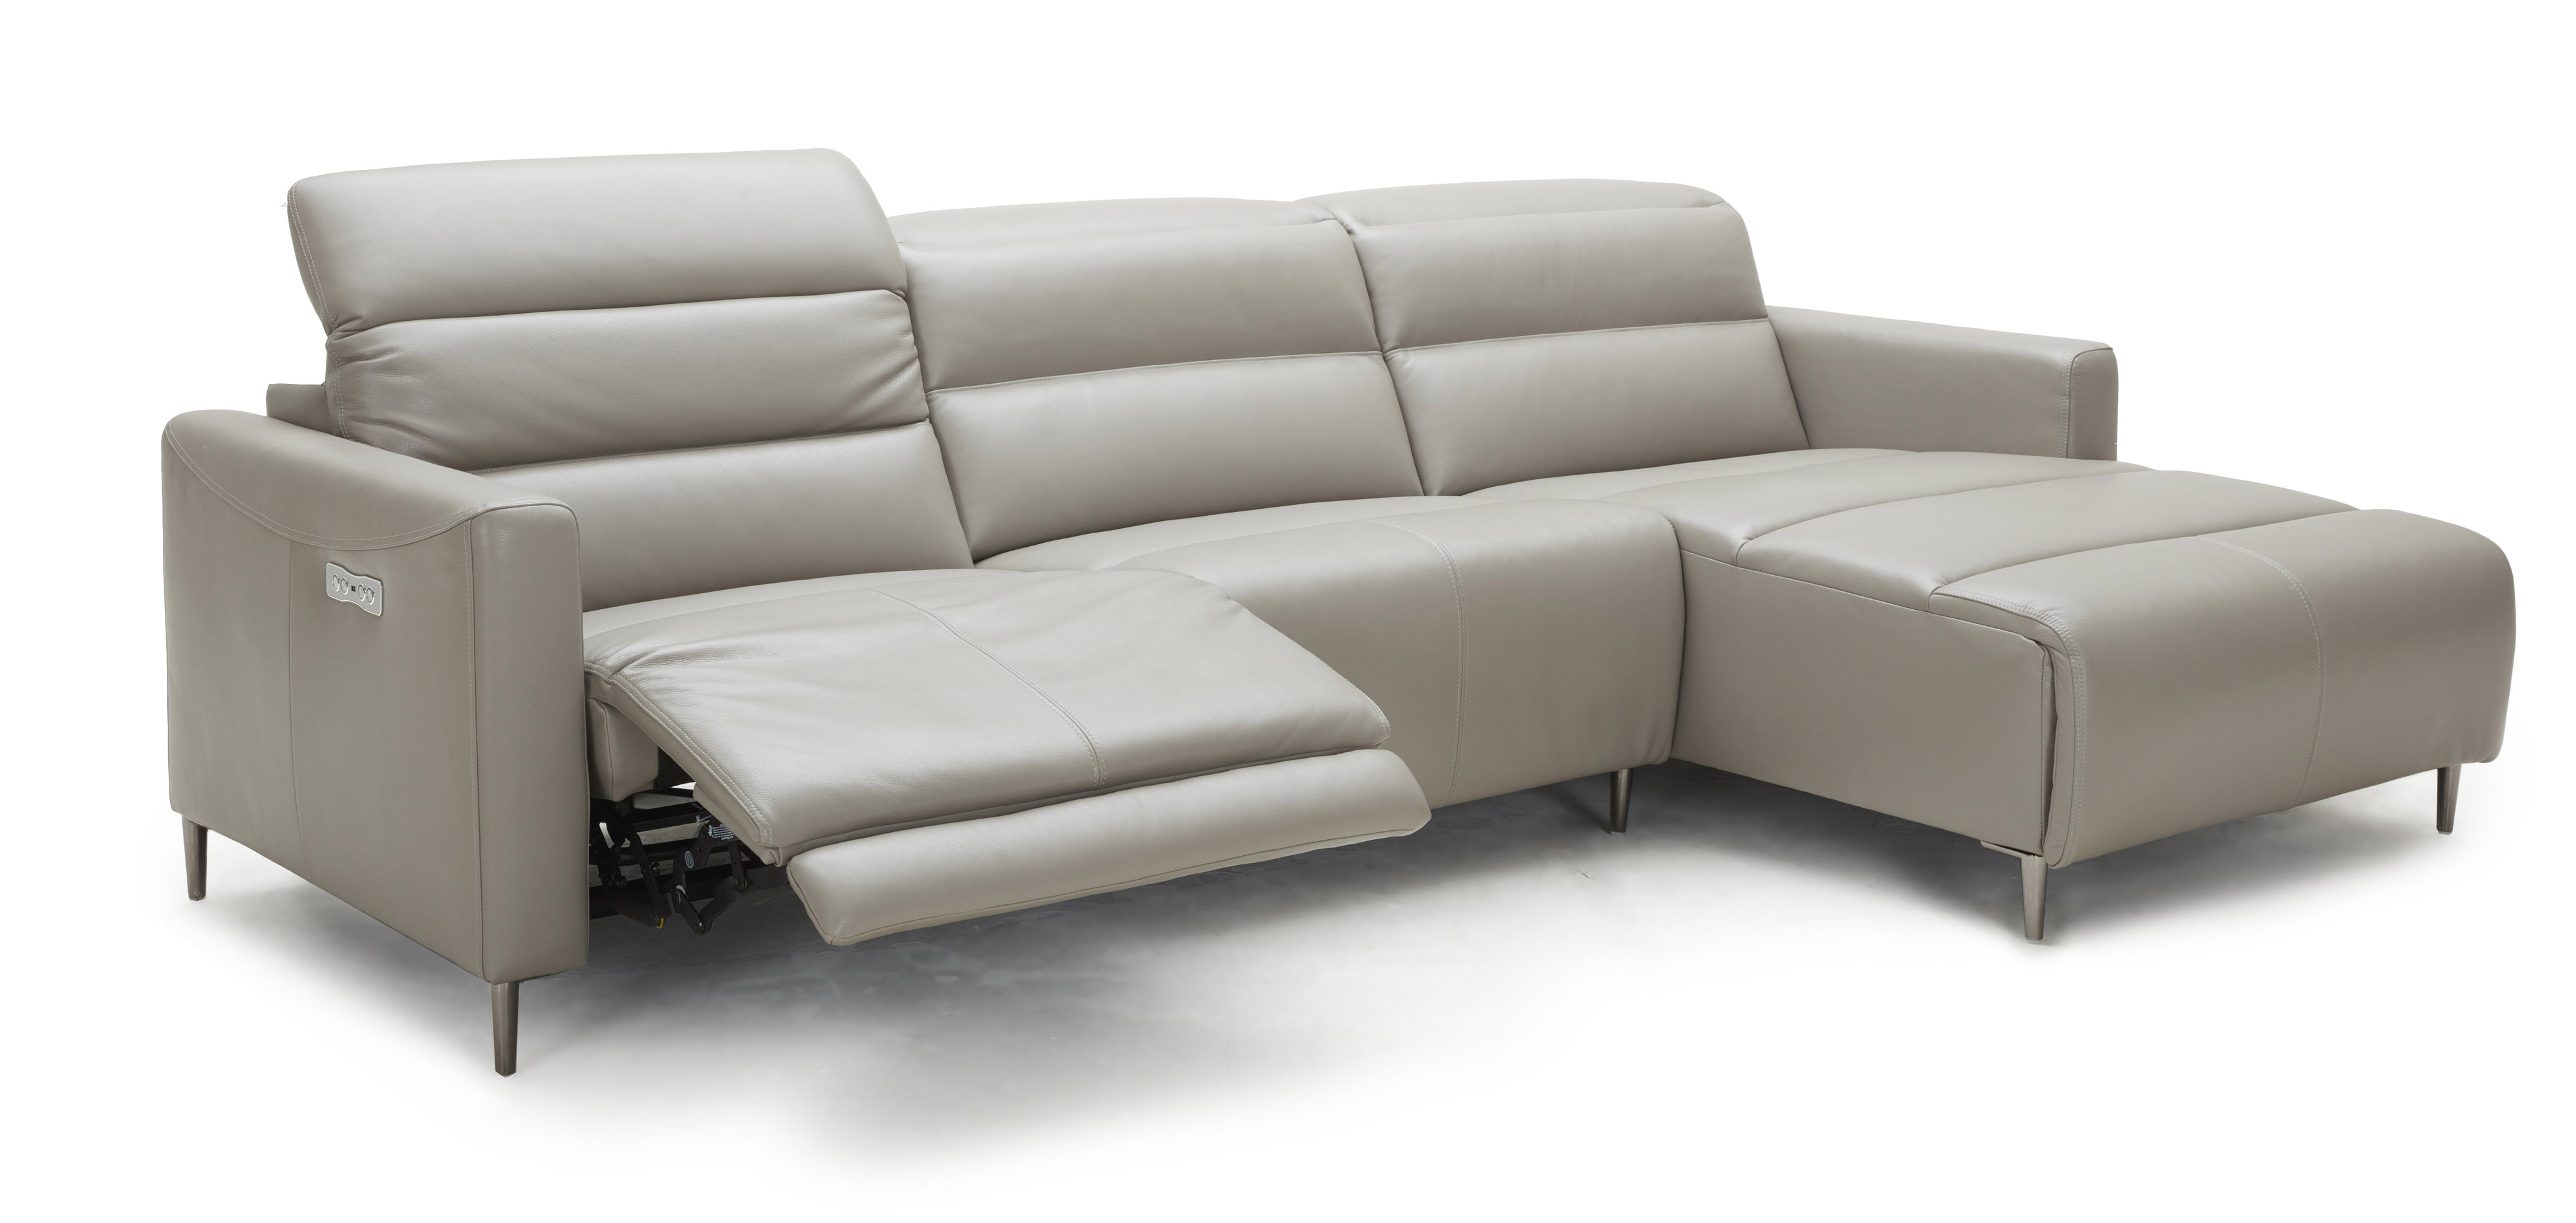 Exclusive Italian Leather Living Room Furniture - Click Image to Close